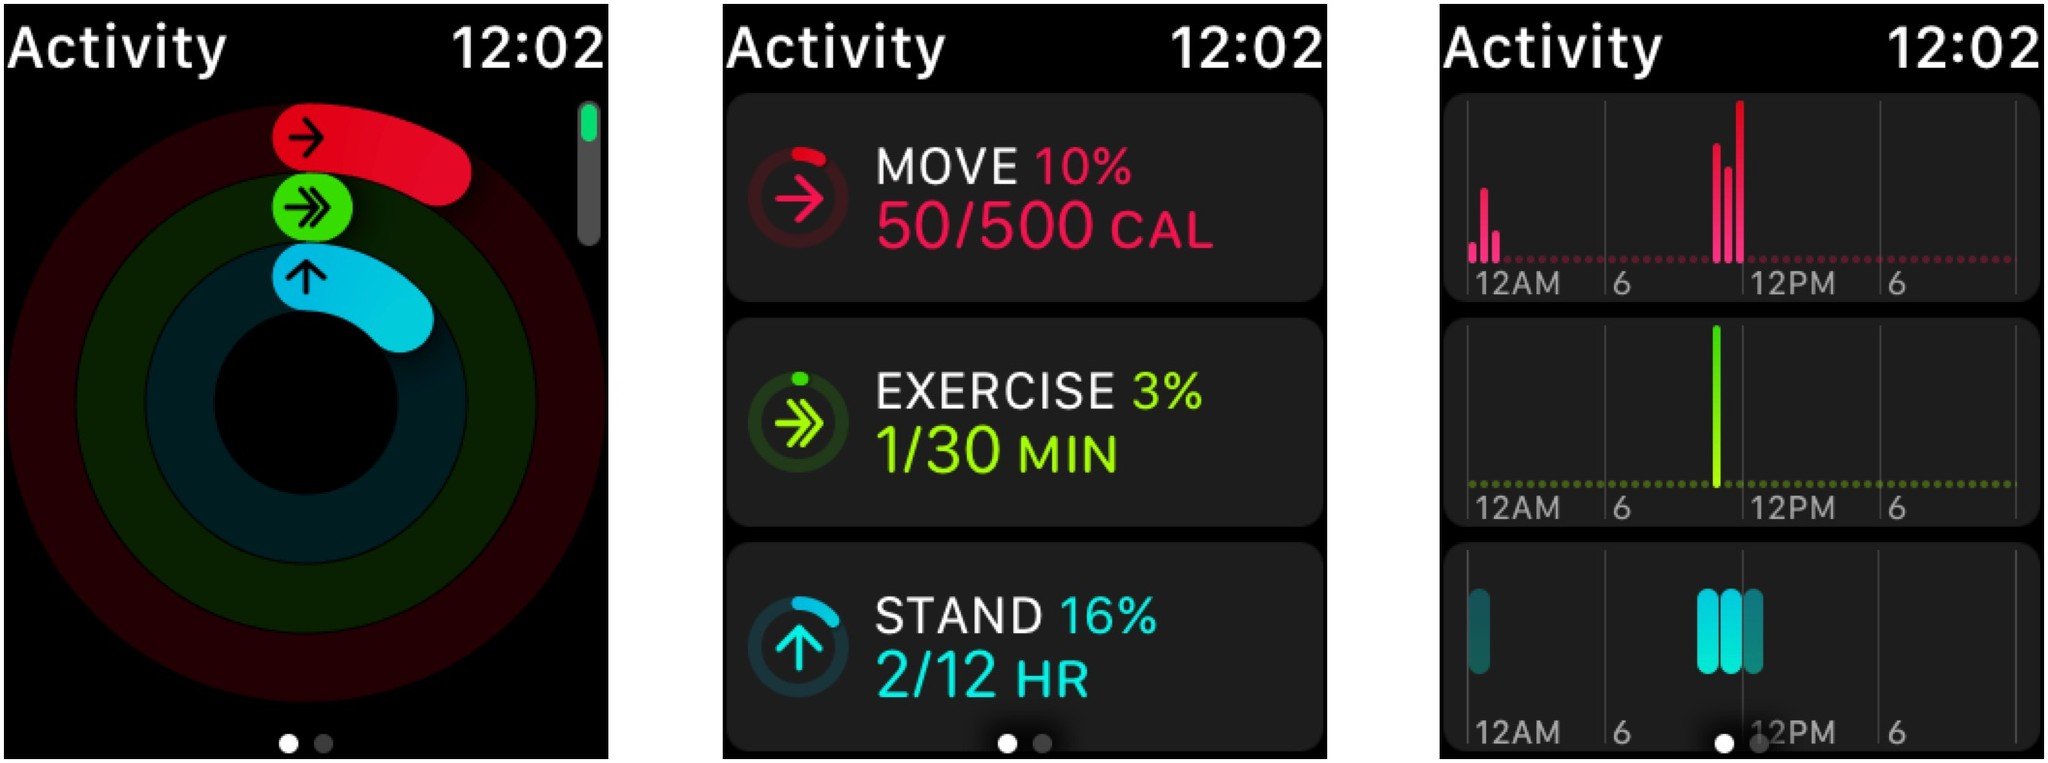 Examples of the information you can see in the activity app.